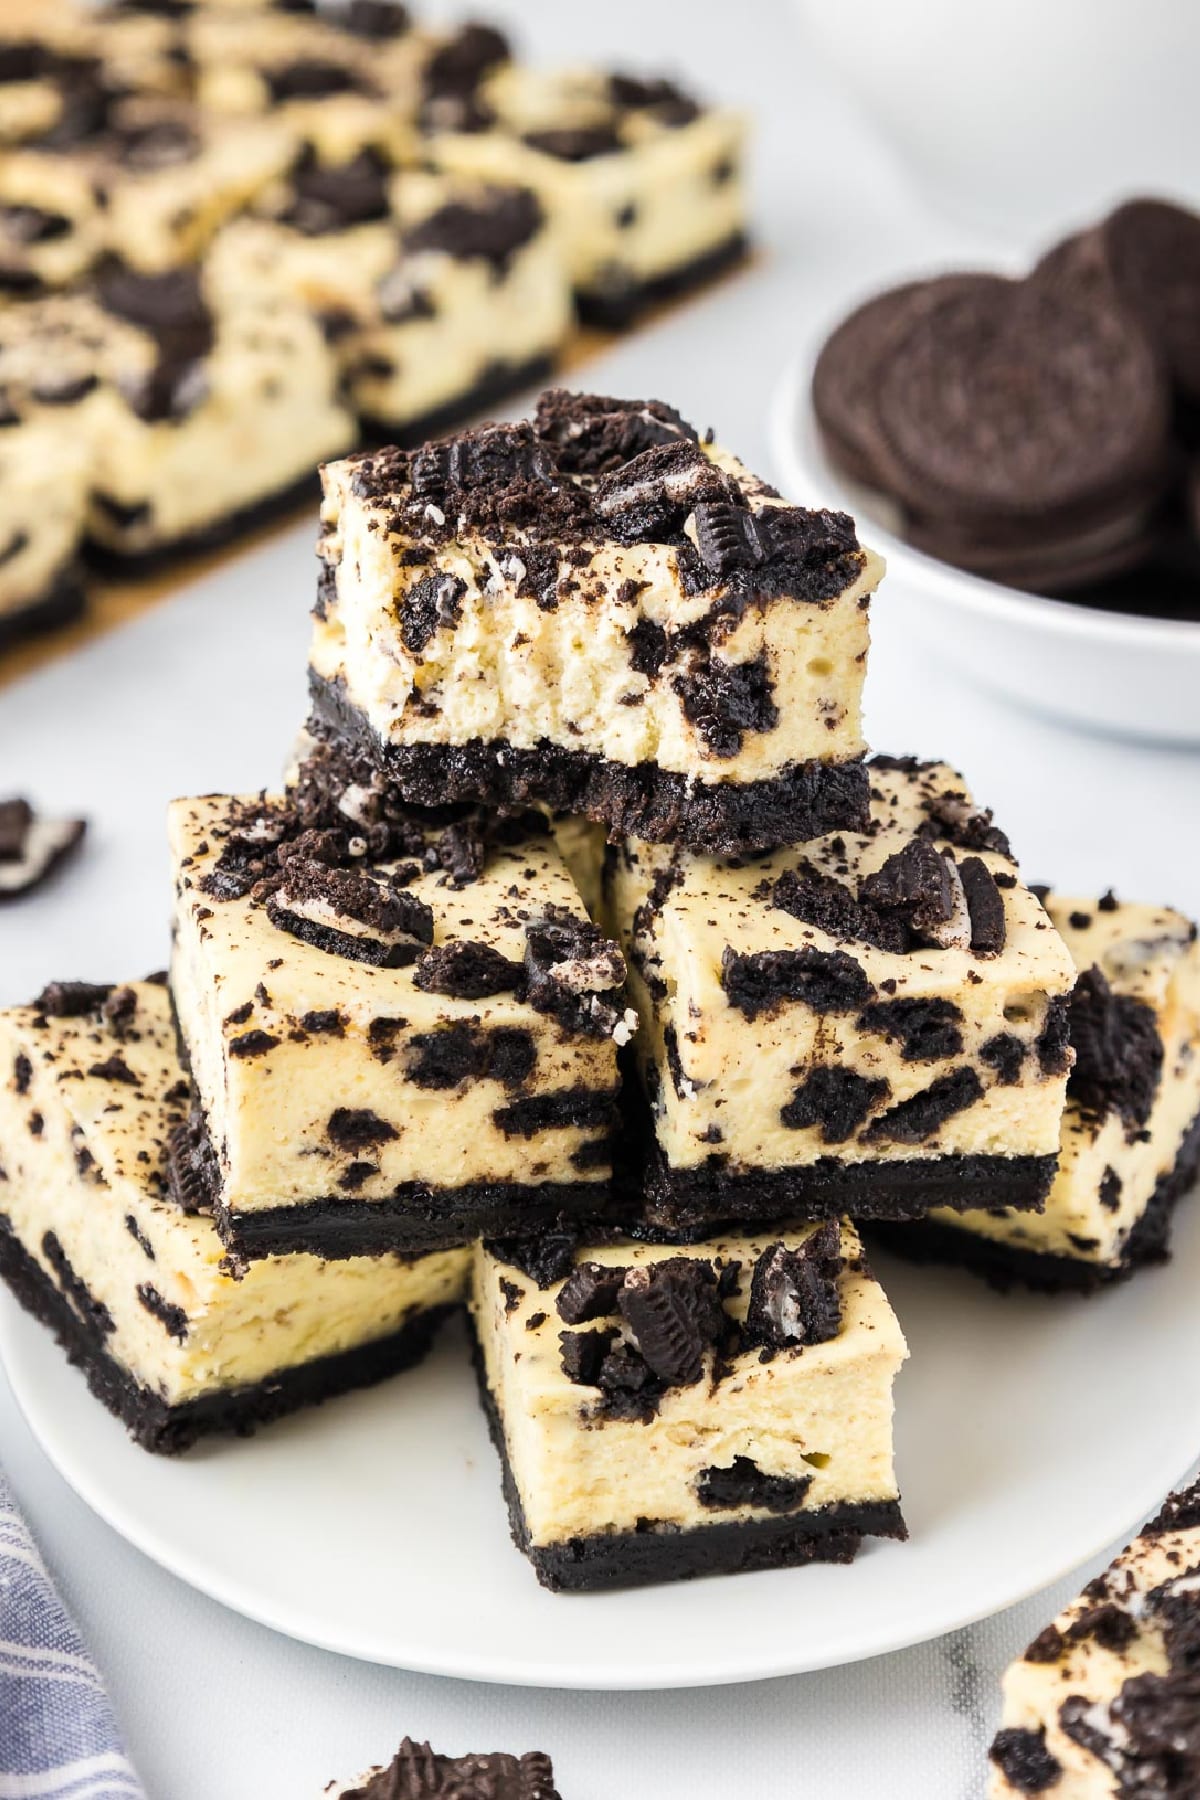 A serving plate full of Oreo cheesecake bars with the top missing a bite, and more bats in the background.